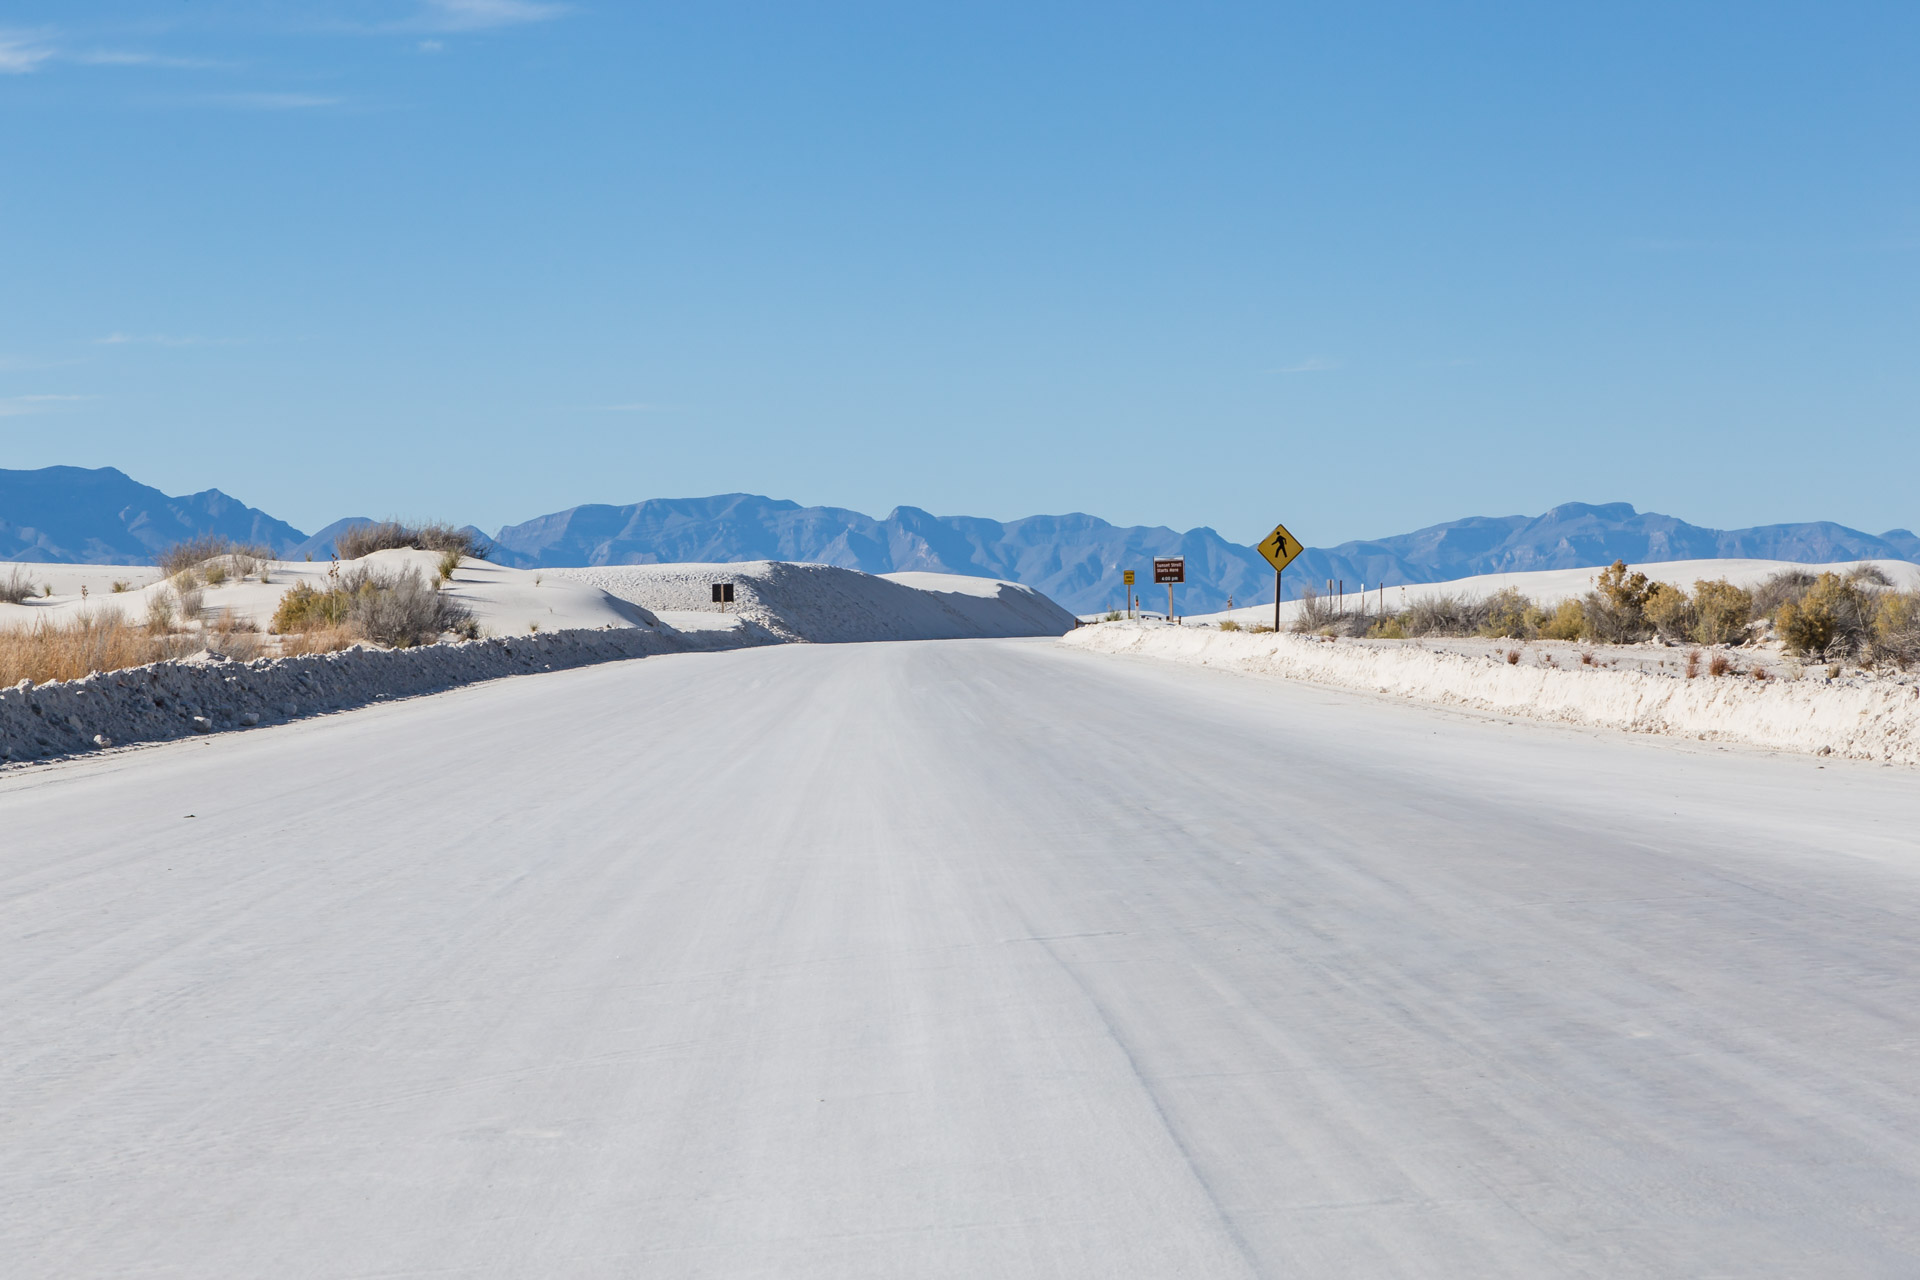 Surviving A Trip To White Sands National Monument